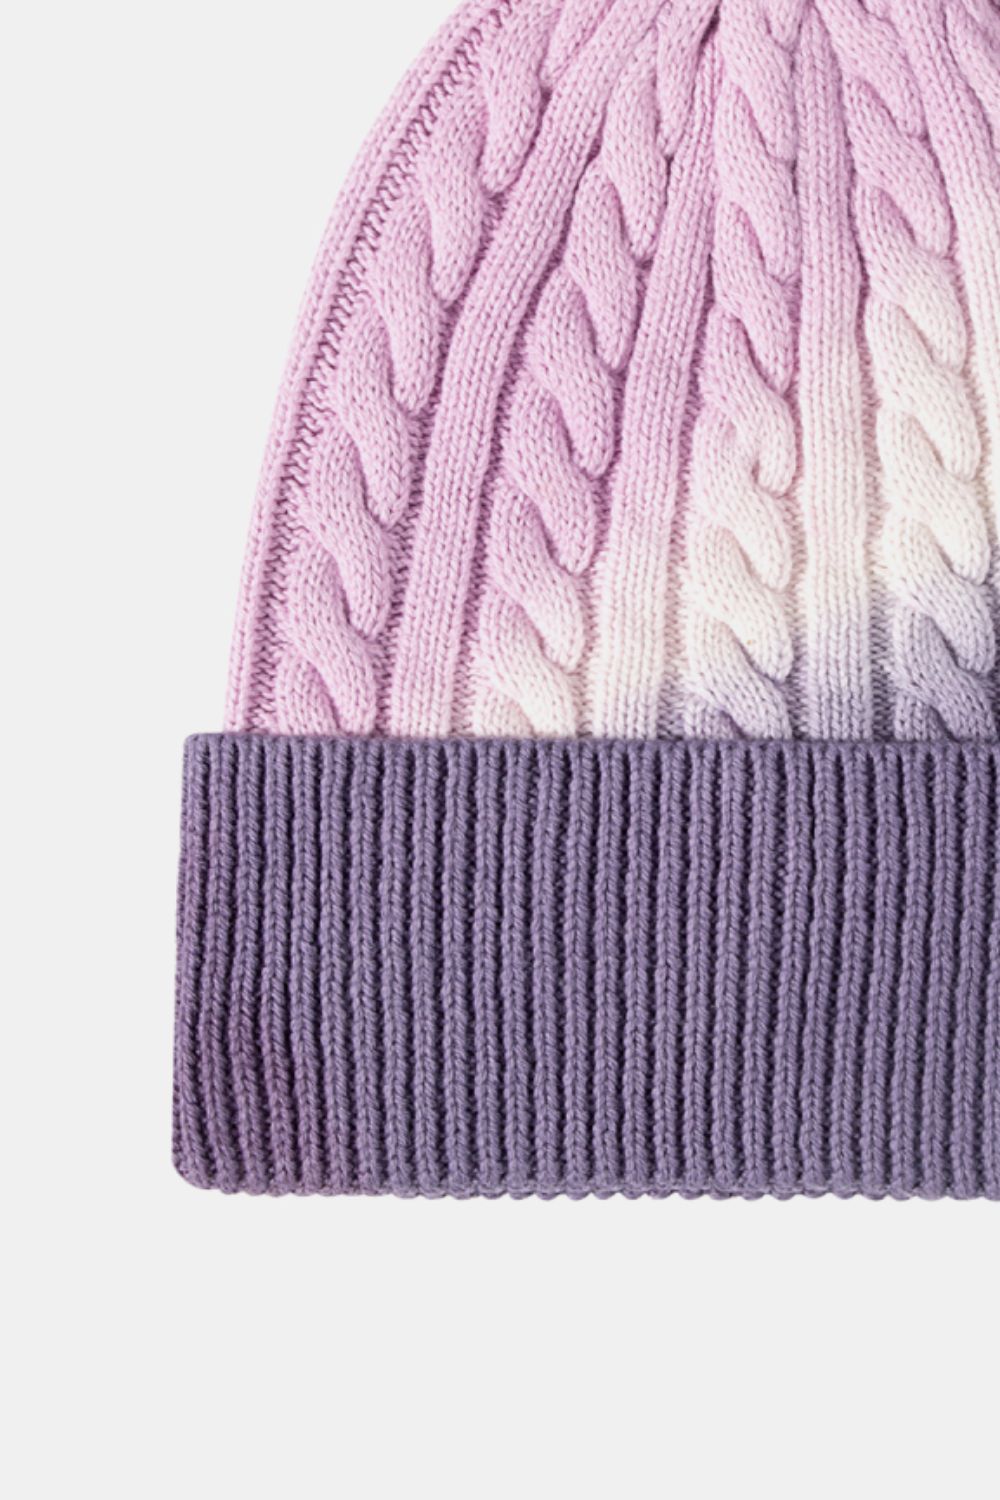 Lavender Contrast Tie-Dye Cable-Knit Cuffed Beanie Sentient Beauty Fashions *Accessories